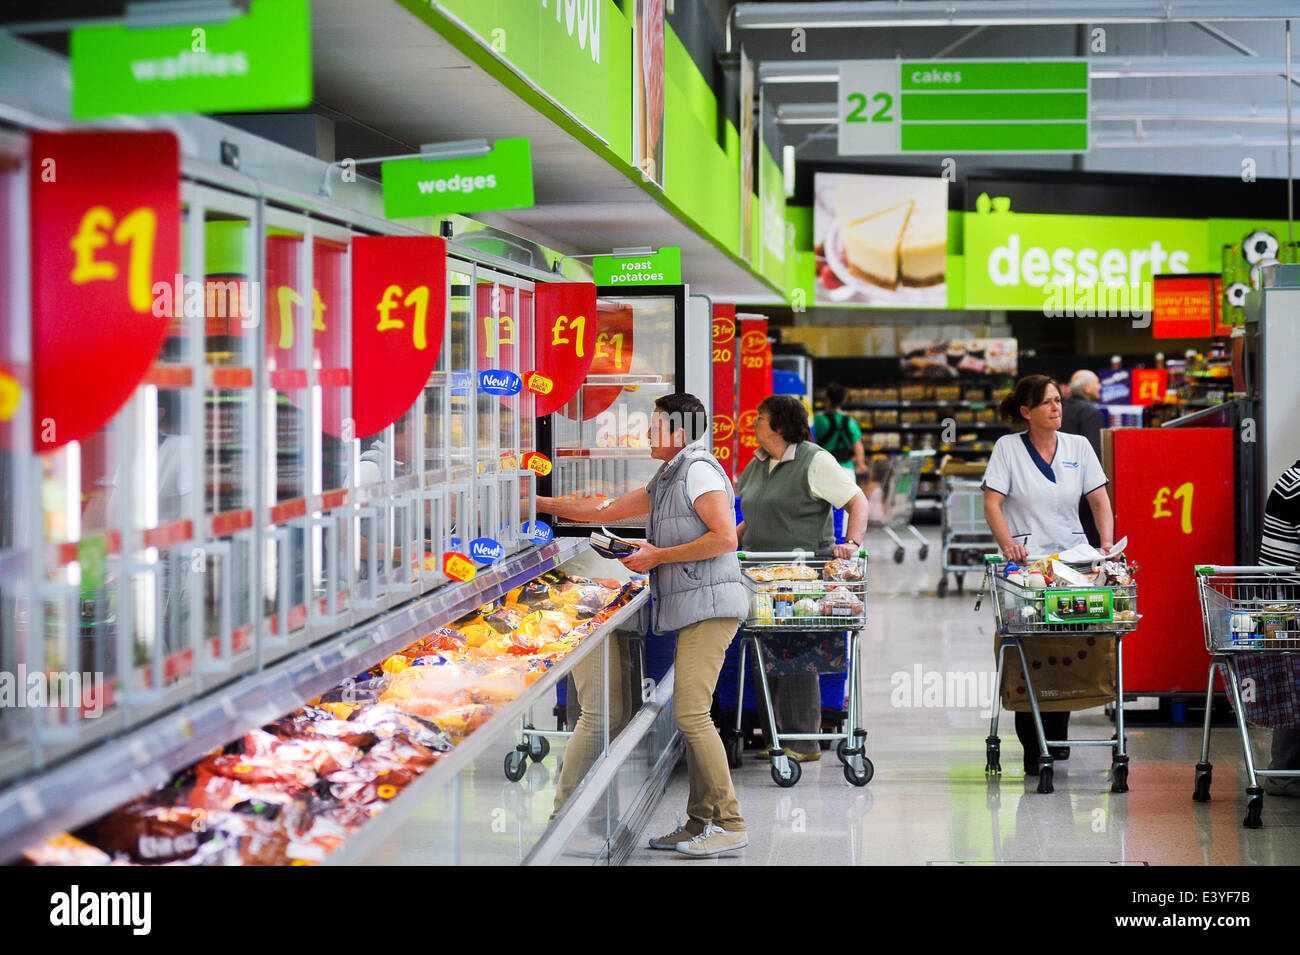 Shoppers looking for bargains in the £1 freezer aisle of ASDA supermarket Stock Photo